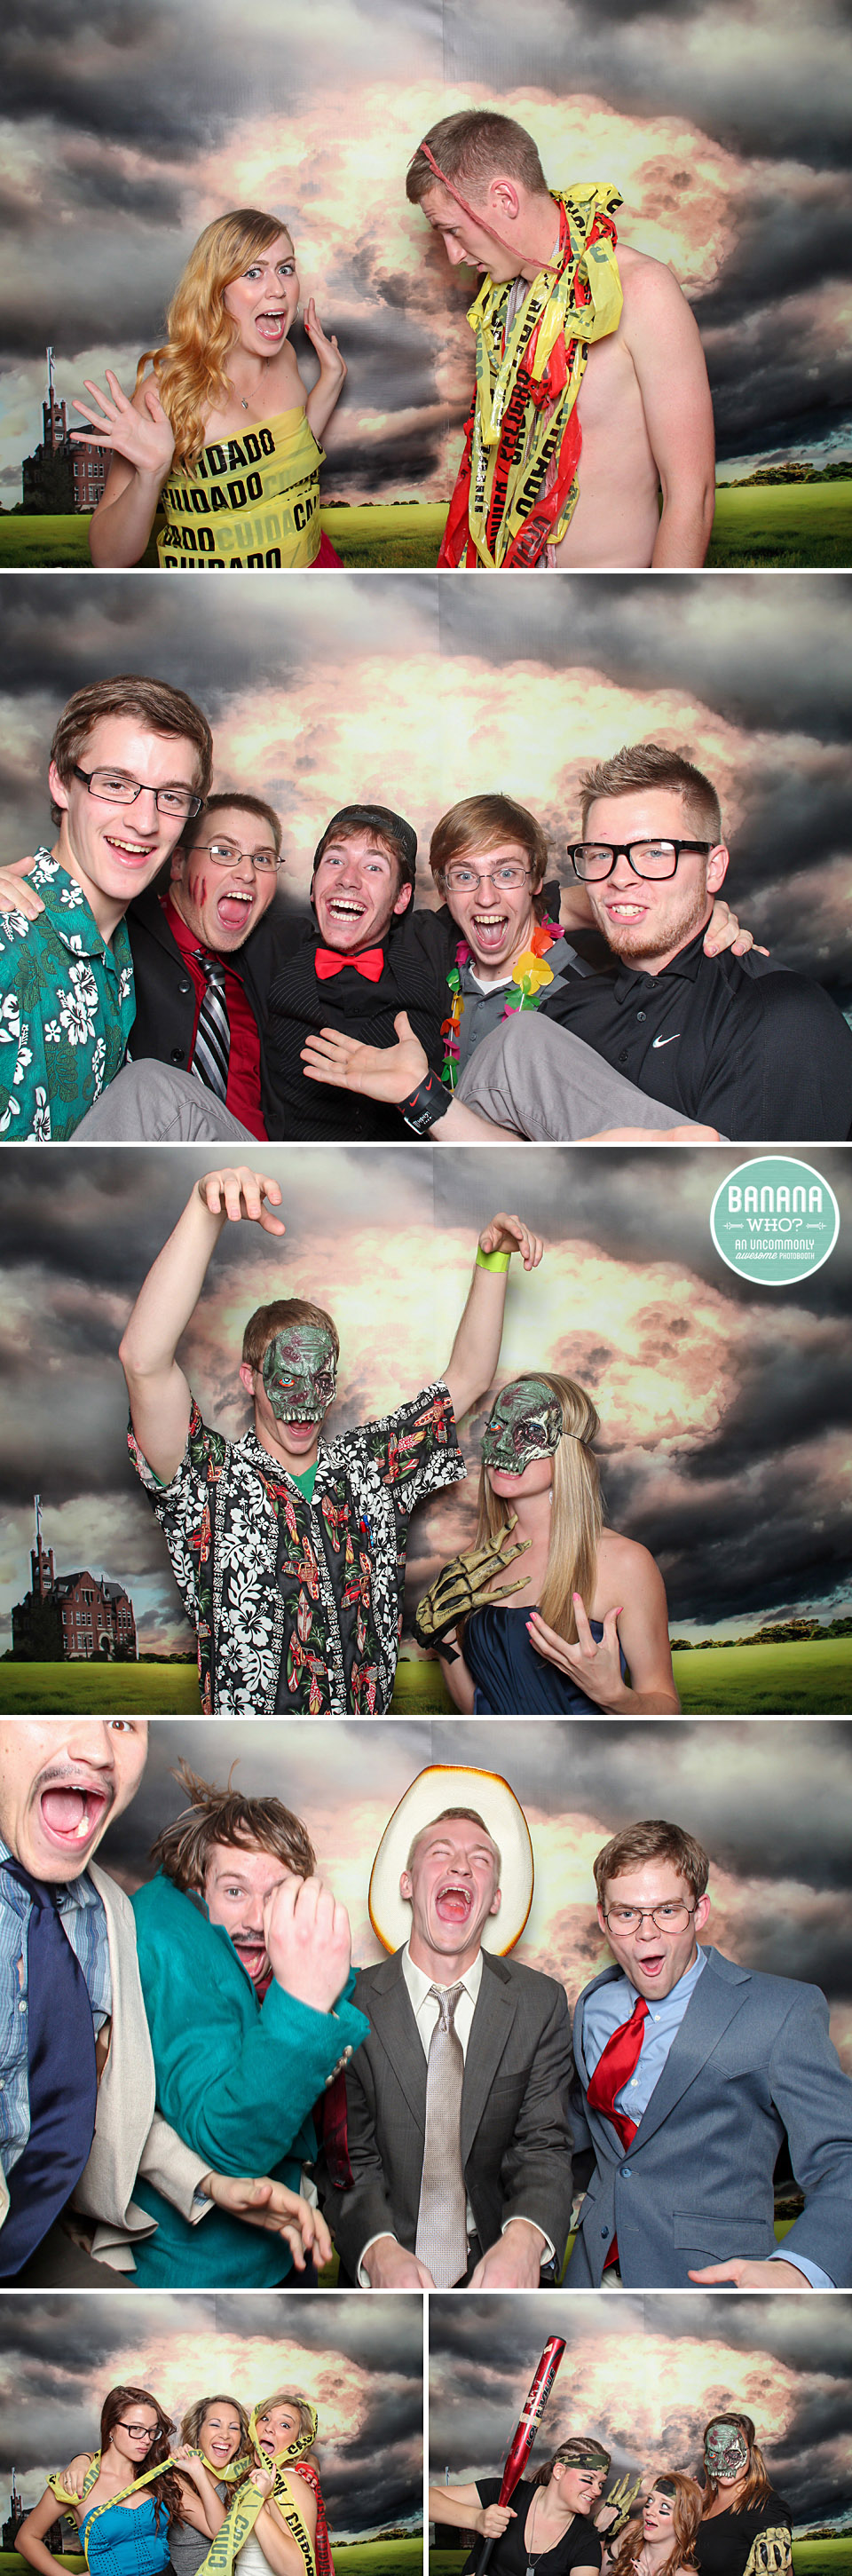 KC weddings, Midwest photobooths, bombs, end of the world, masks, props